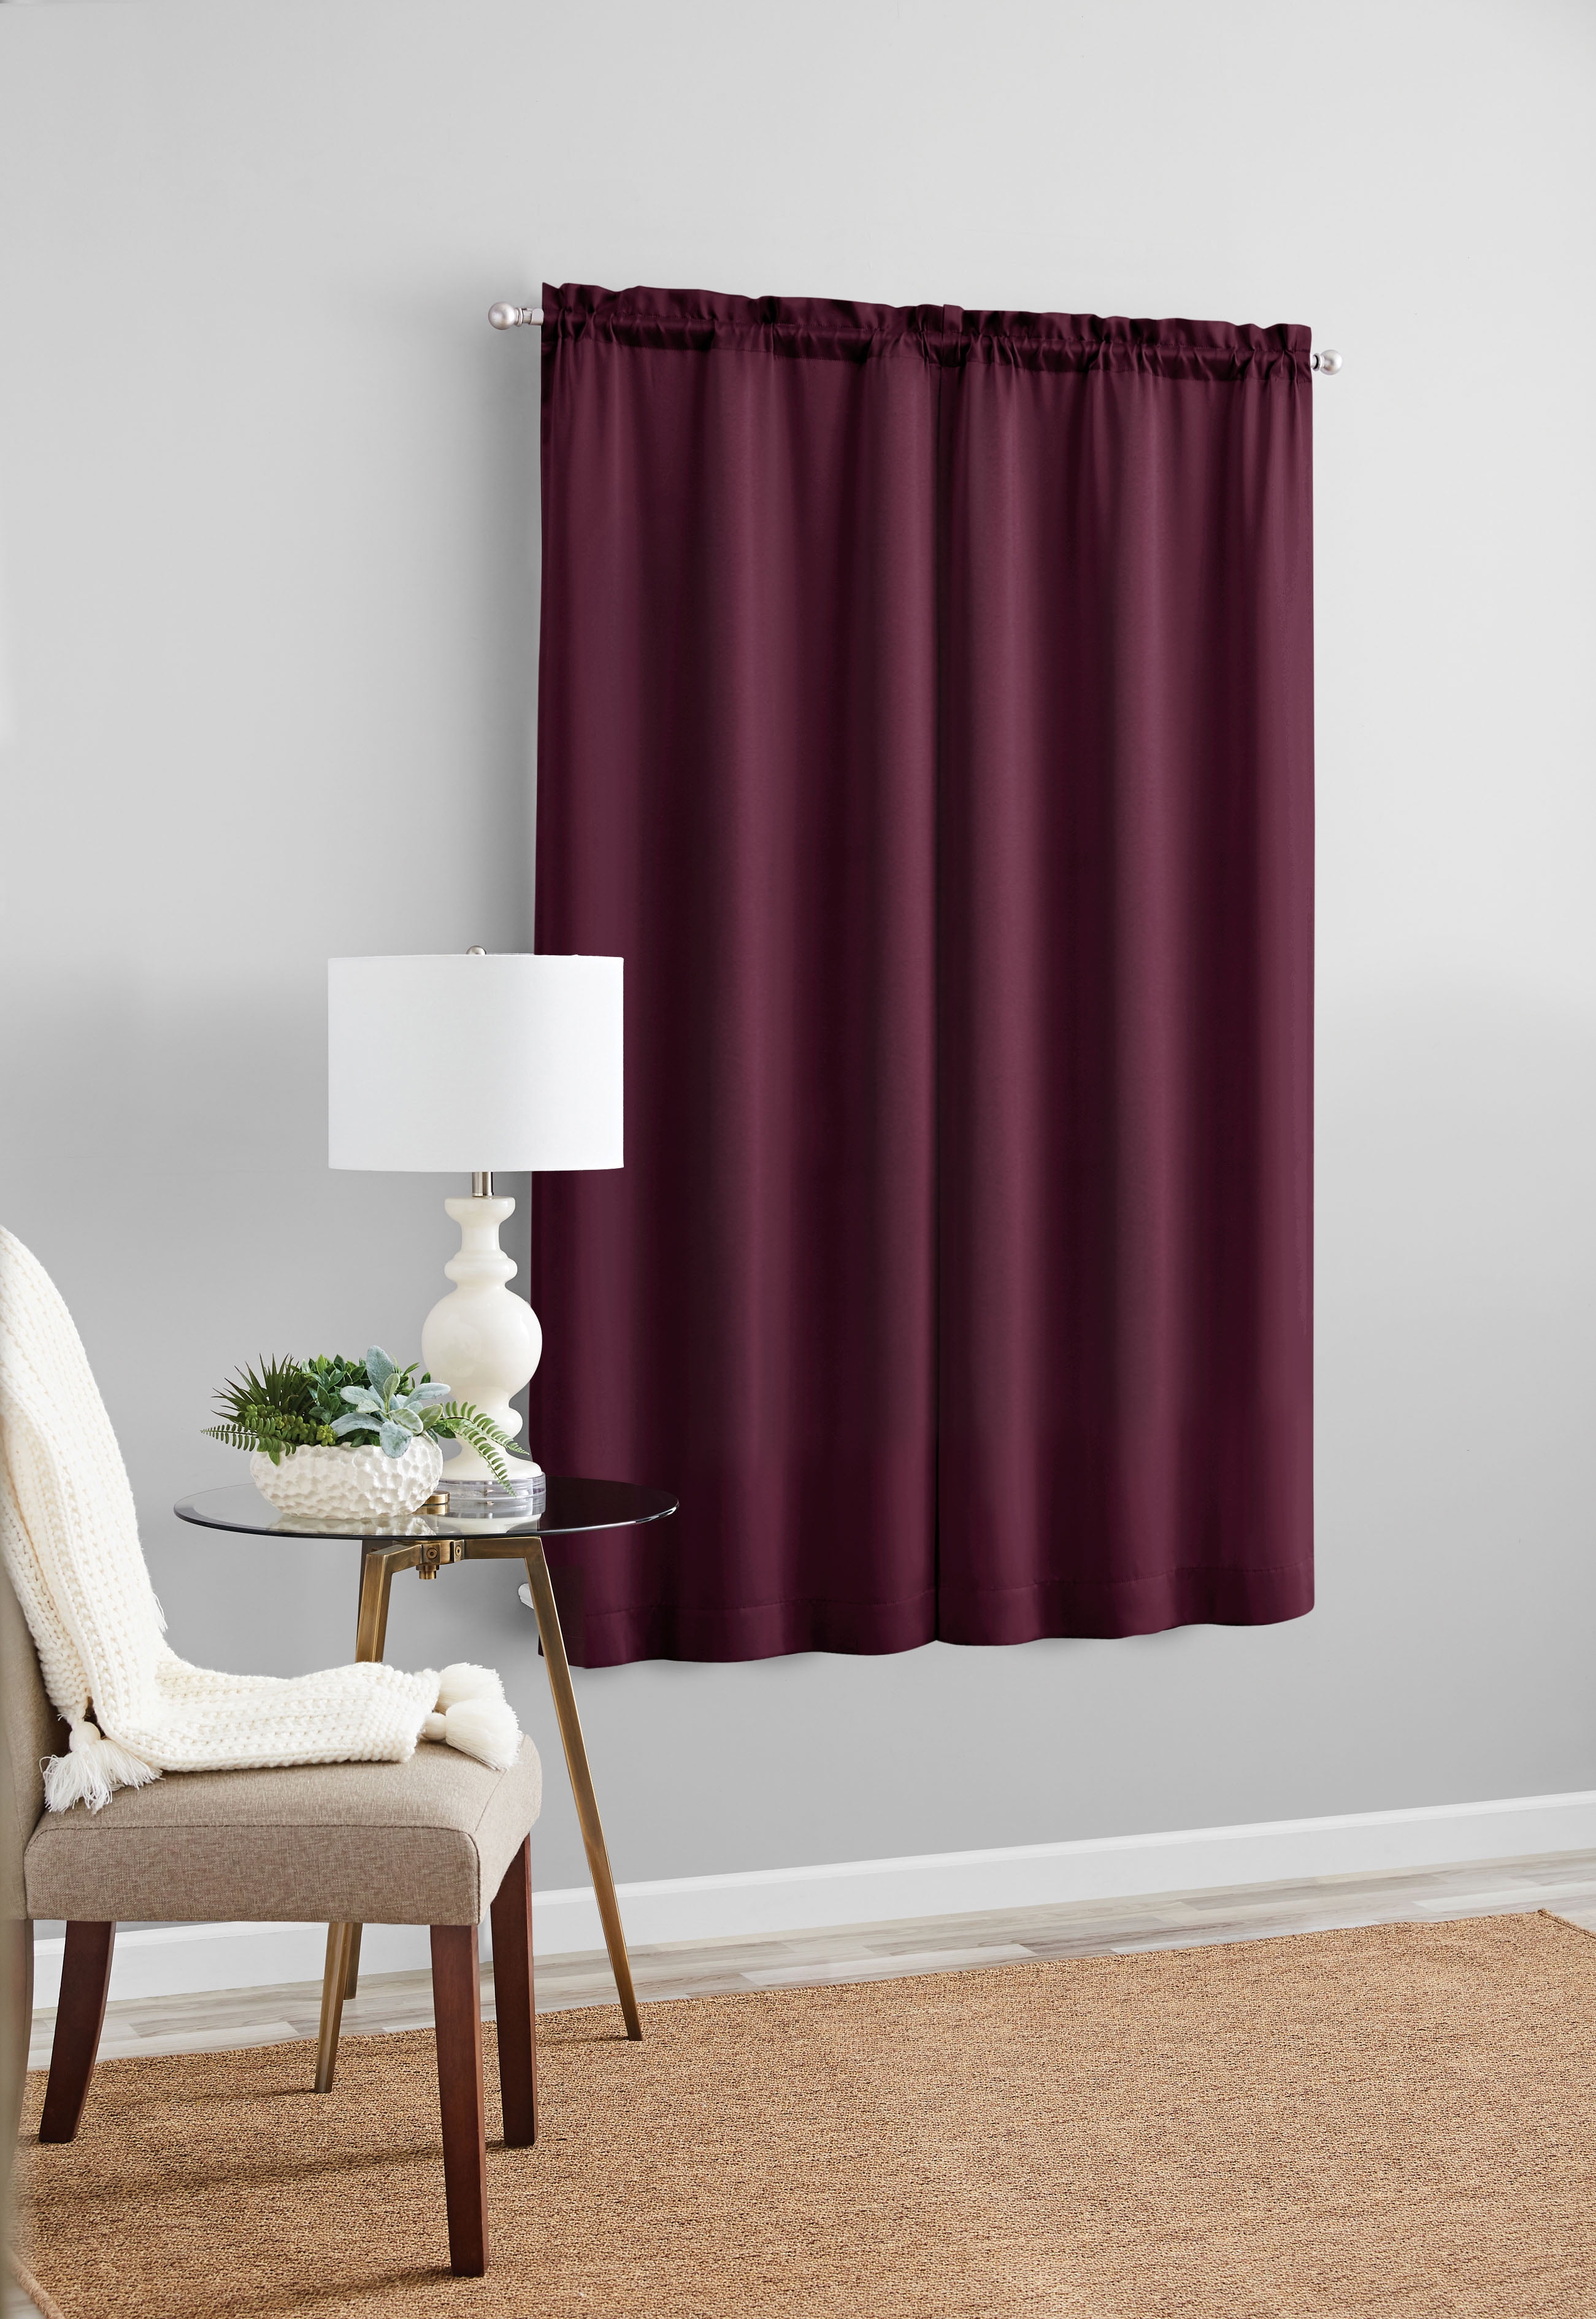 MESHELLY Rustic Wine Curtains 29W x 63H Inch Rod Pocket Farmhouse Glasses  of Red Wine Grapes on Wood…See more MESHELLY Rustic Wine Curtains 29W x 63H